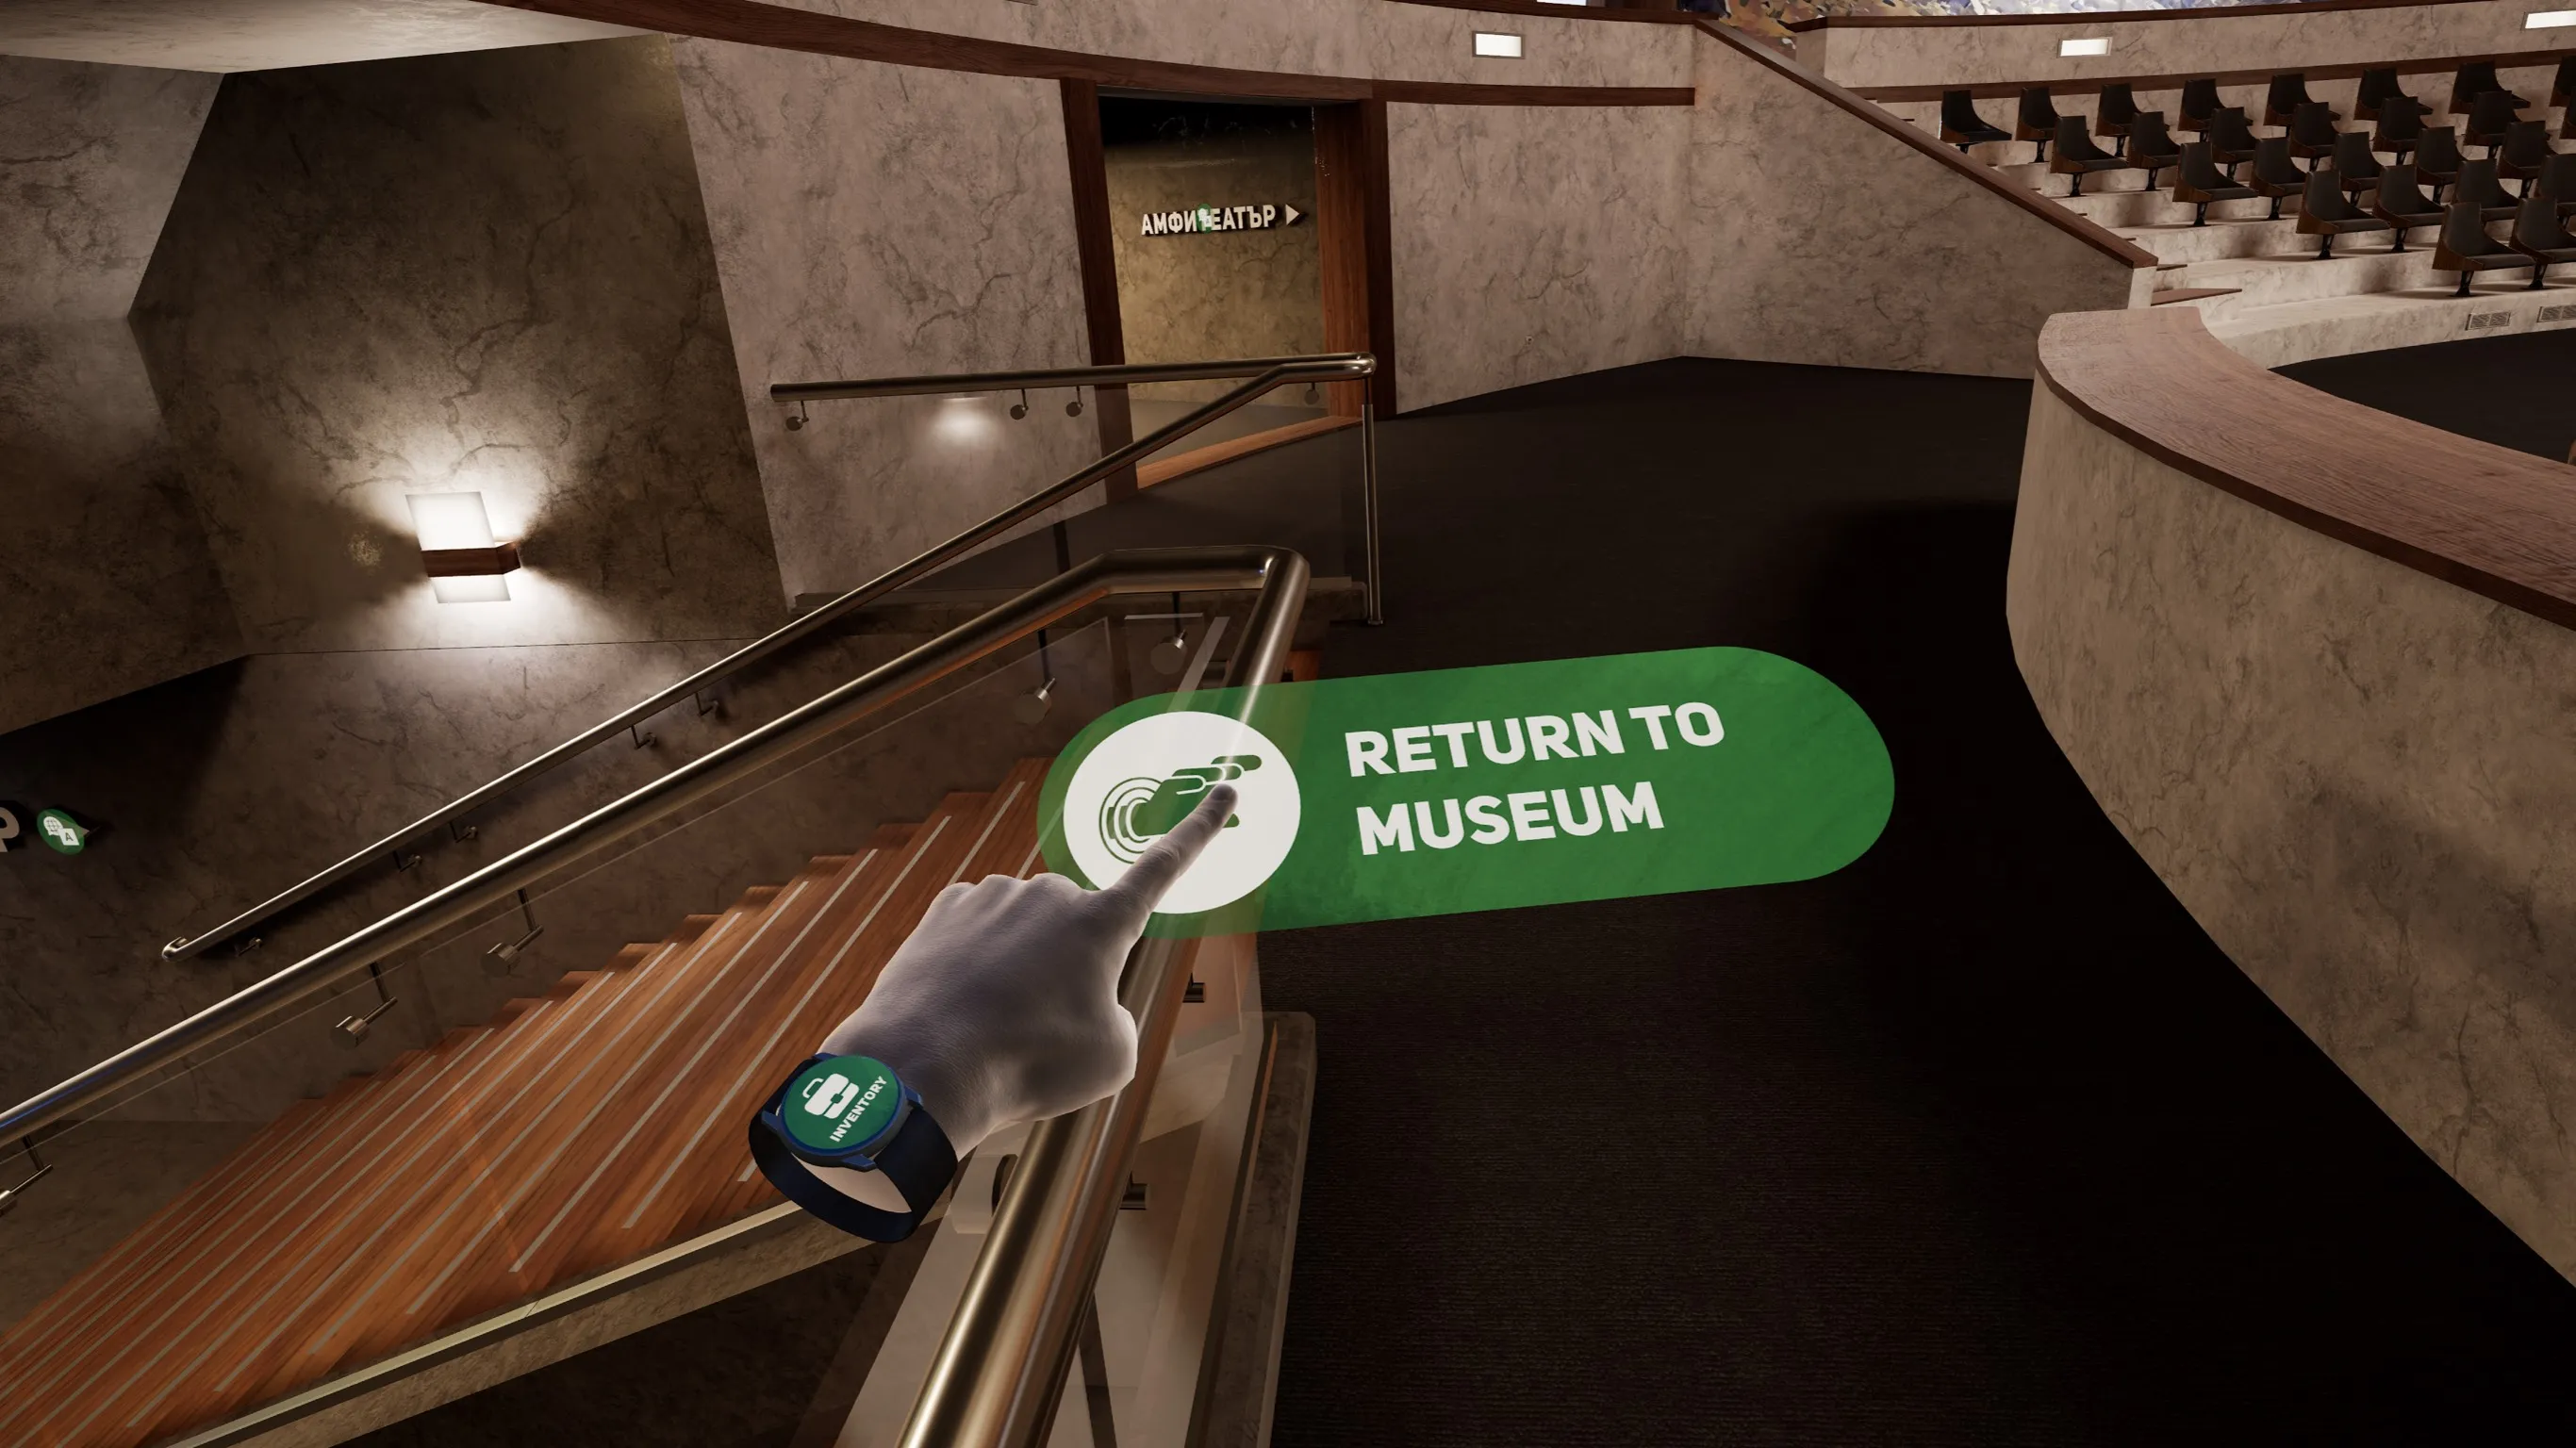 The image is a virtual reality (VR) simulation of an auditorium's exit stairway leading to a museum. A person's hand, rendered in VR, is pointing to a floating green icon with white text that reads "RETURN TO MUSEUM," featuring a circular arrow symbol indicative of going back. The hand is wearing a VR controller strap around the wrist for interaction within the simulation. The stairway is modern with wooden steps and metal handrails. There is also an “Amphitheatre” sign on the wall in Bulgarian with an arrow pointing to the left, directing towards the auditorium. The auditorium seats are visible in the background, suggesting the user is leaving the seating area. The environment blends realistic textures and lighting with VR interface elements.